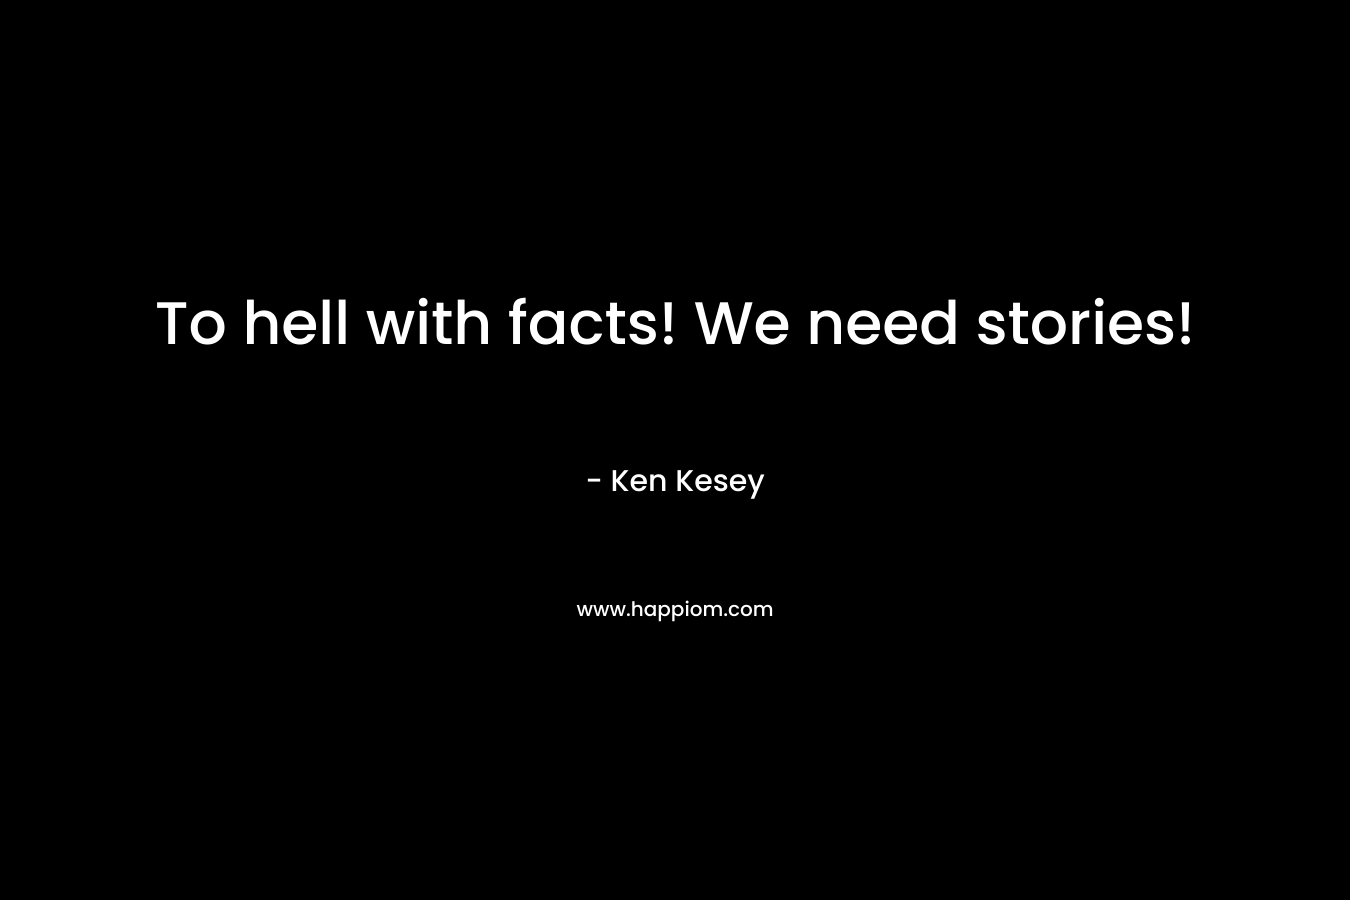 To hell with facts! We need stories!